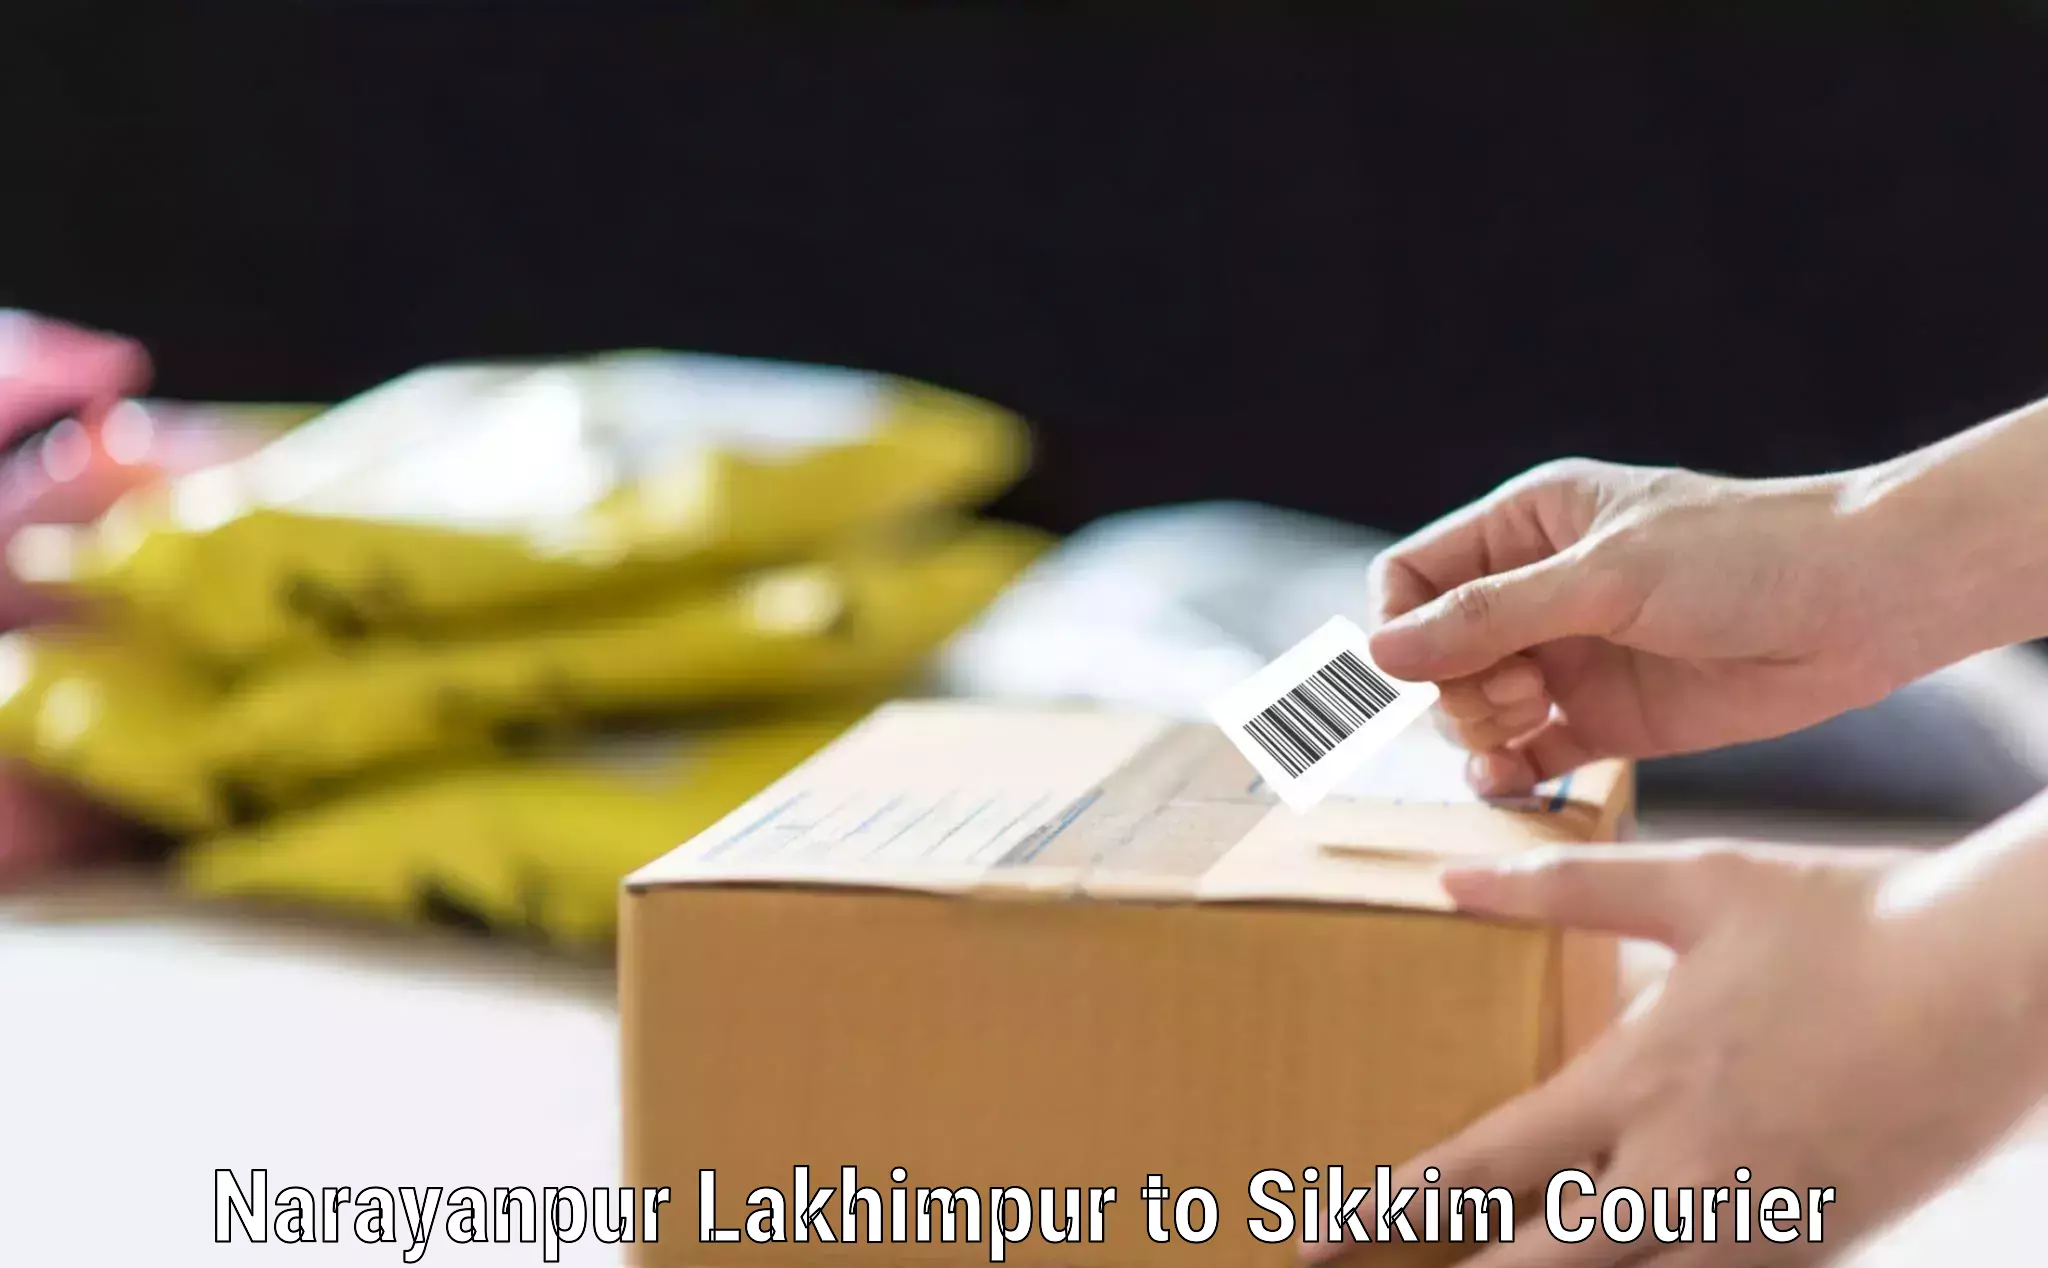 Heavy luggage shipping in Narayanpur Lakhimpur to East Sikkim